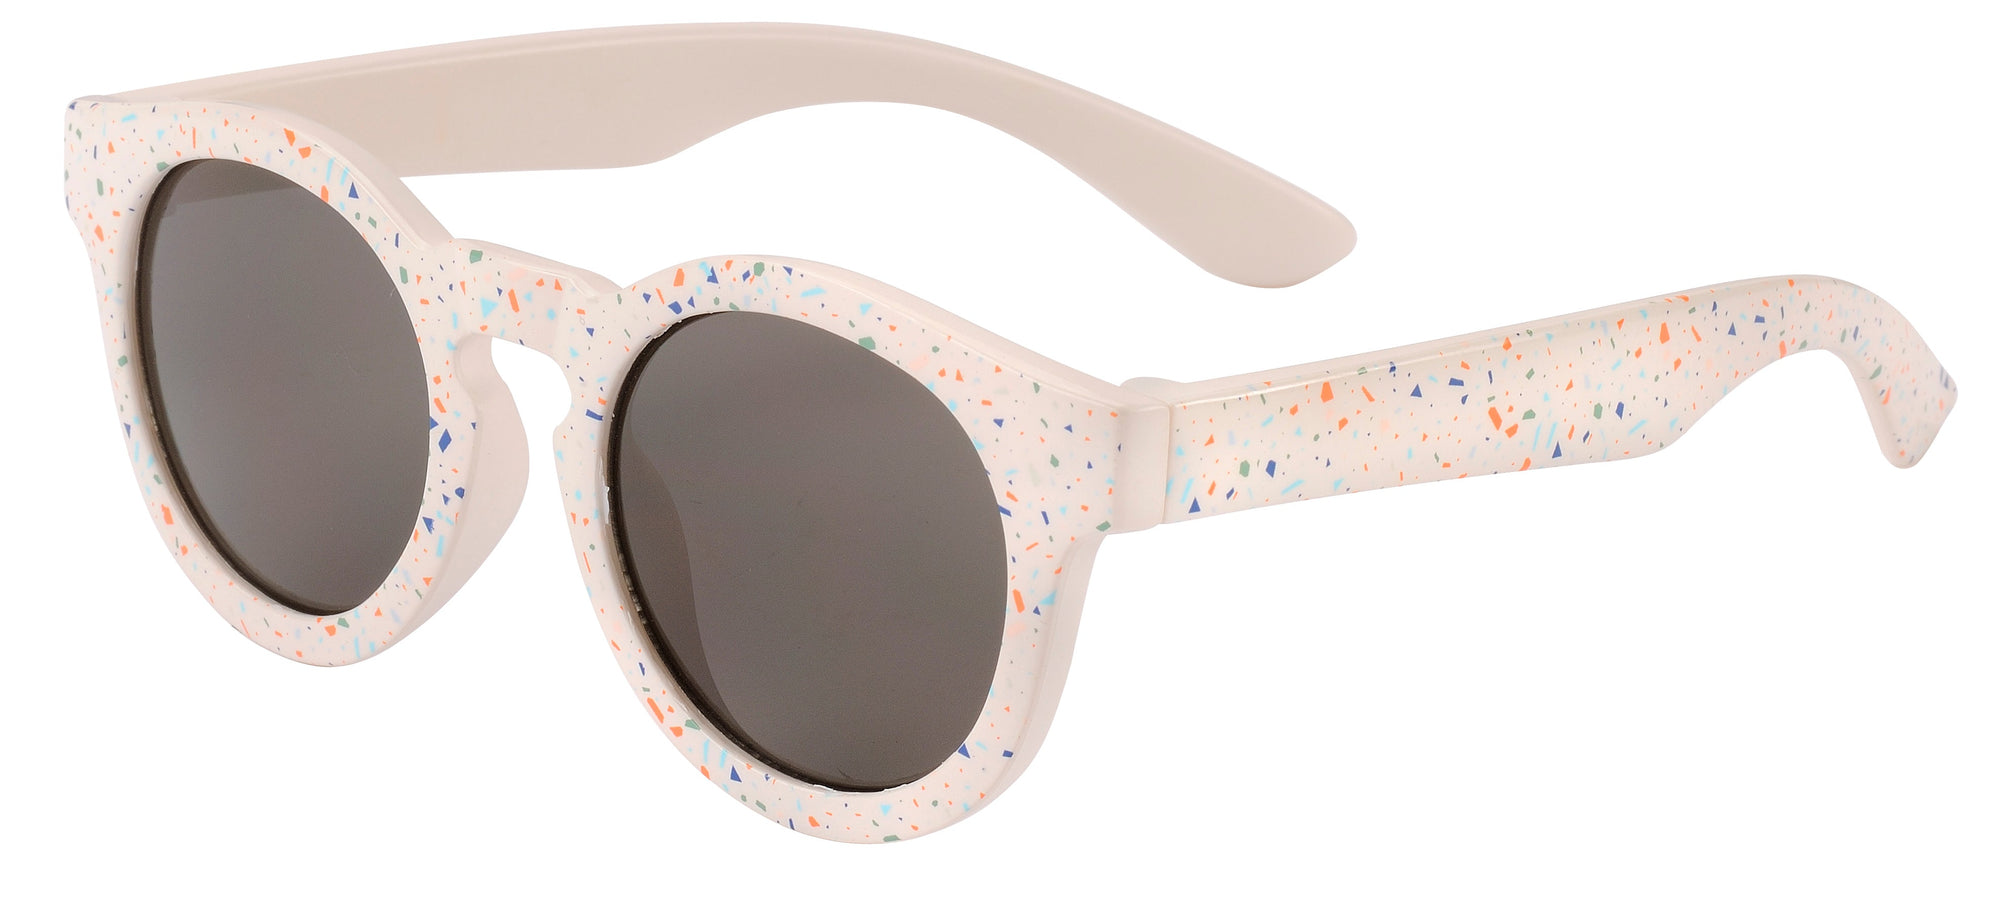 Baby Eco Sunglasses - Sand Speckle